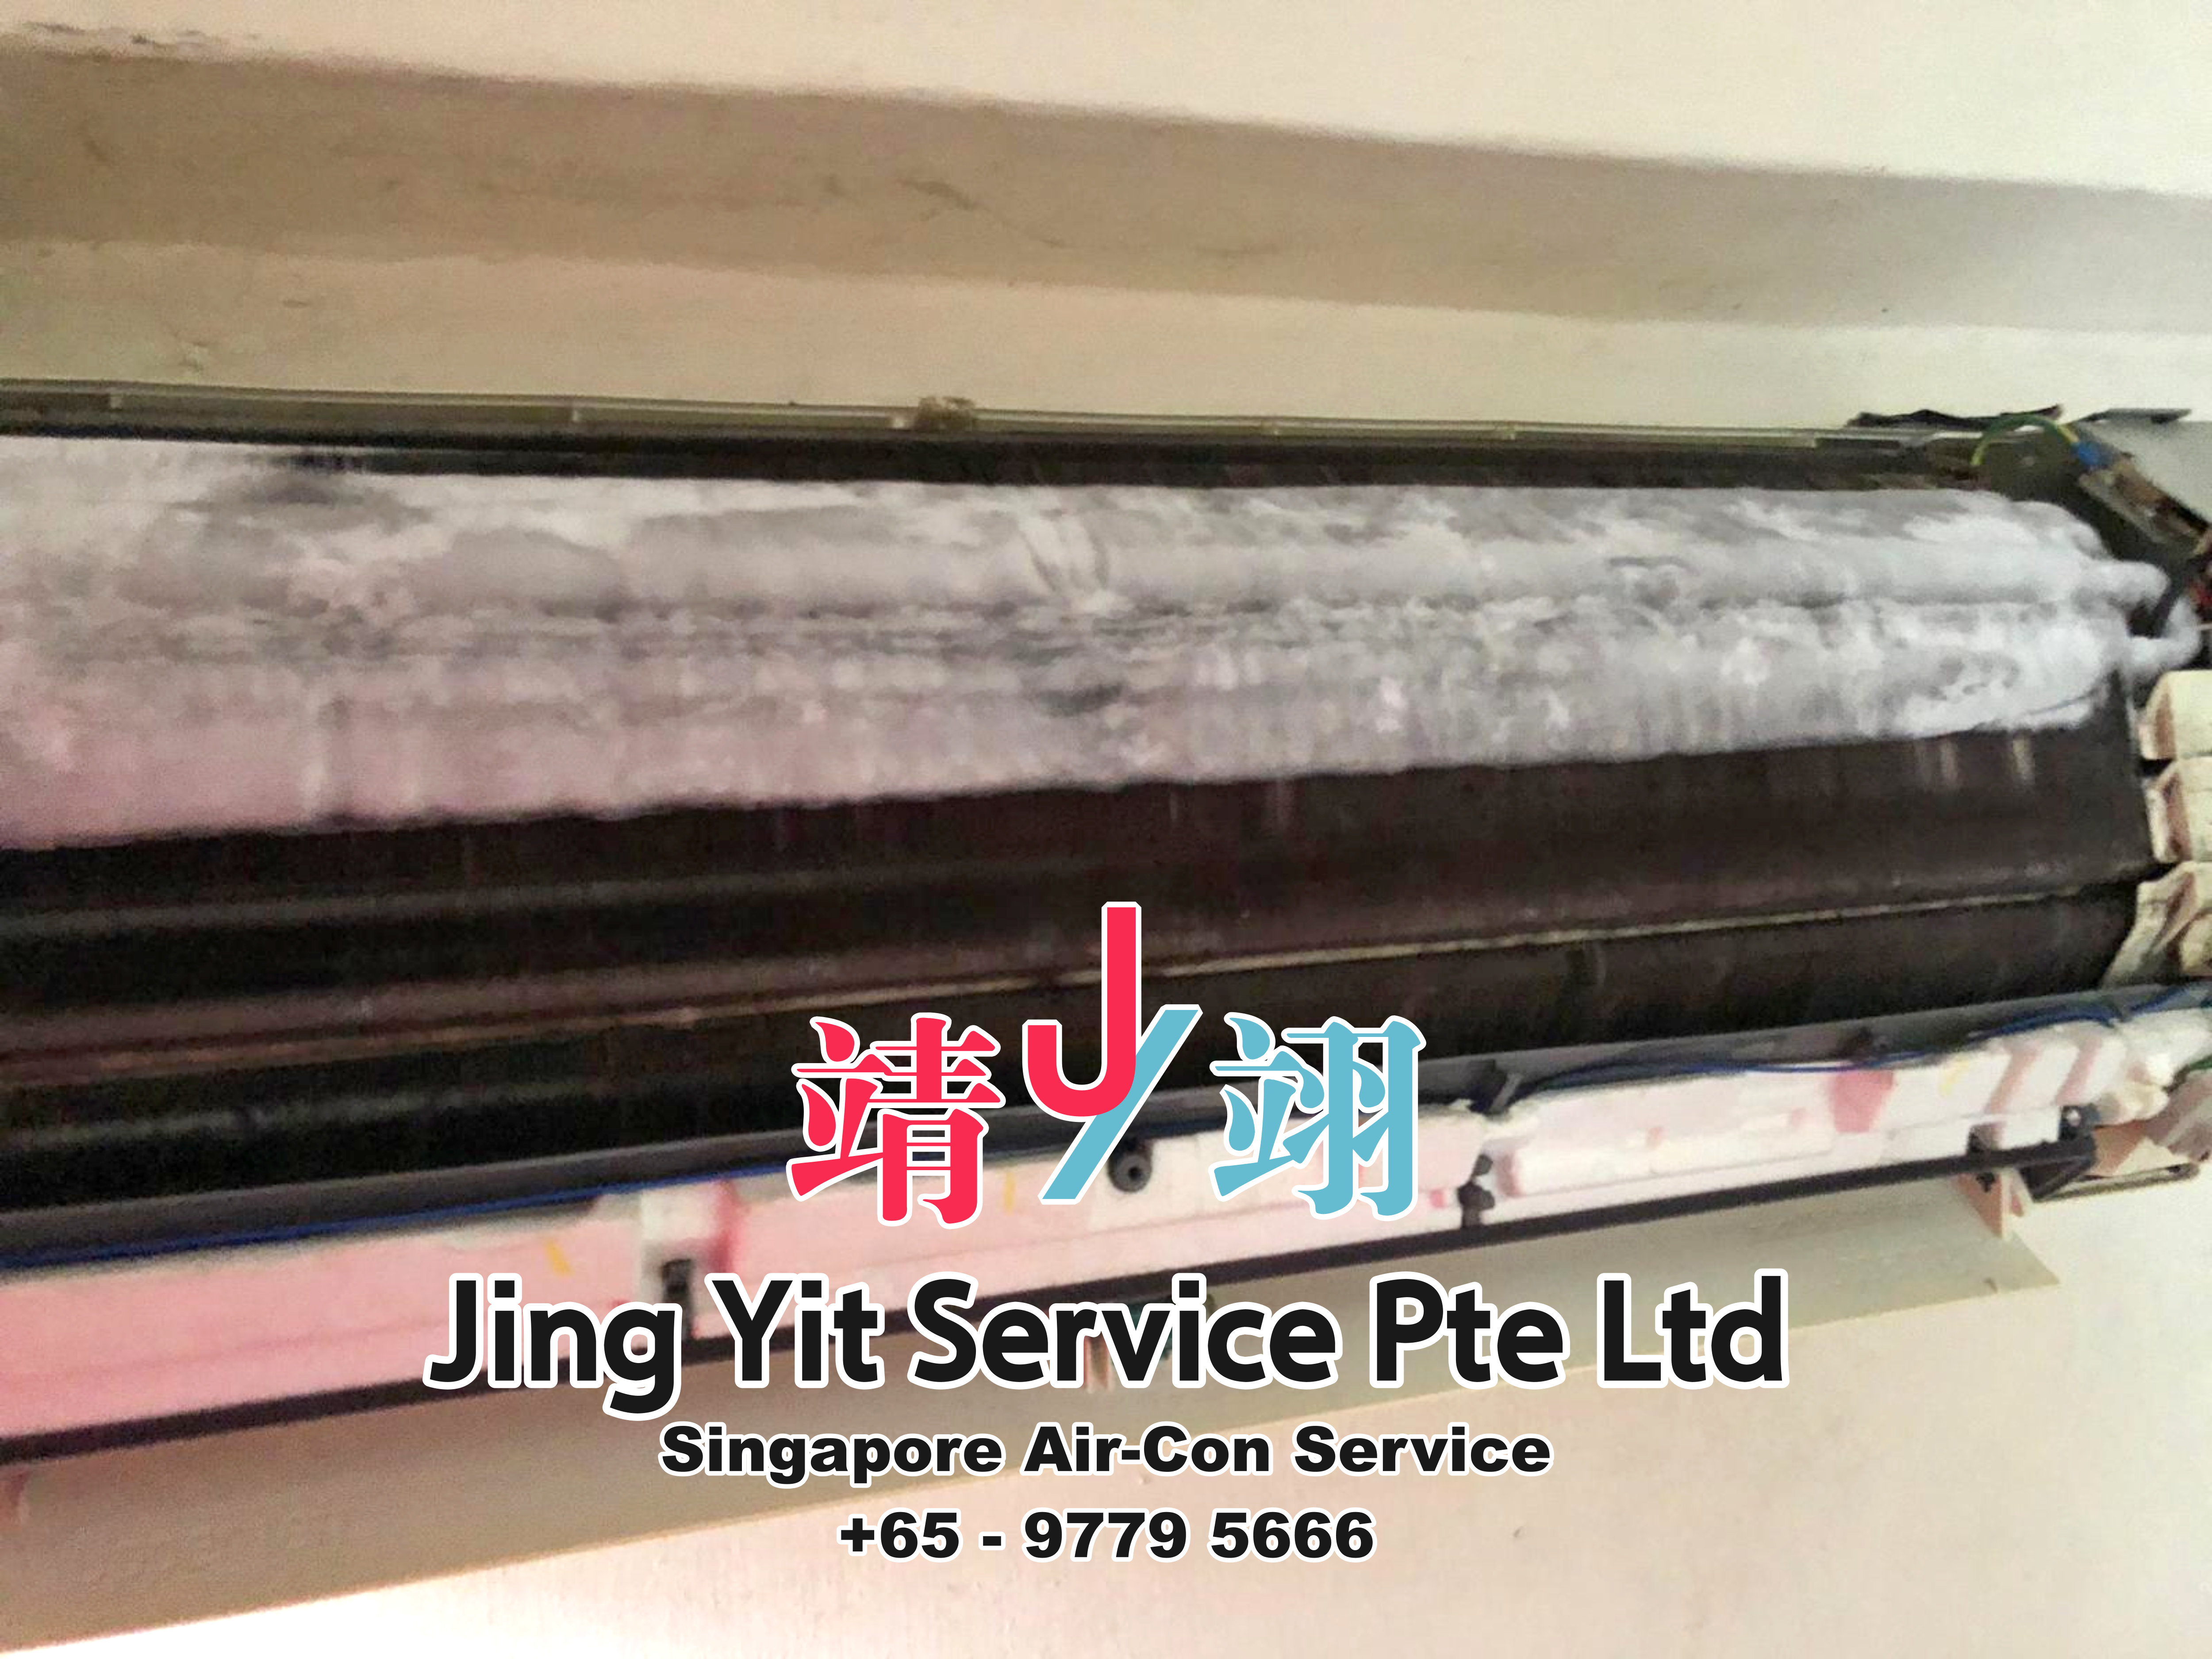 Singapore AirCon Service Air Conditioning Cleaning Repairing and Installation Air-con Gas Refill Aircon Chemical Wash Singapore Jing Yit Service Pte Ltd A02-21